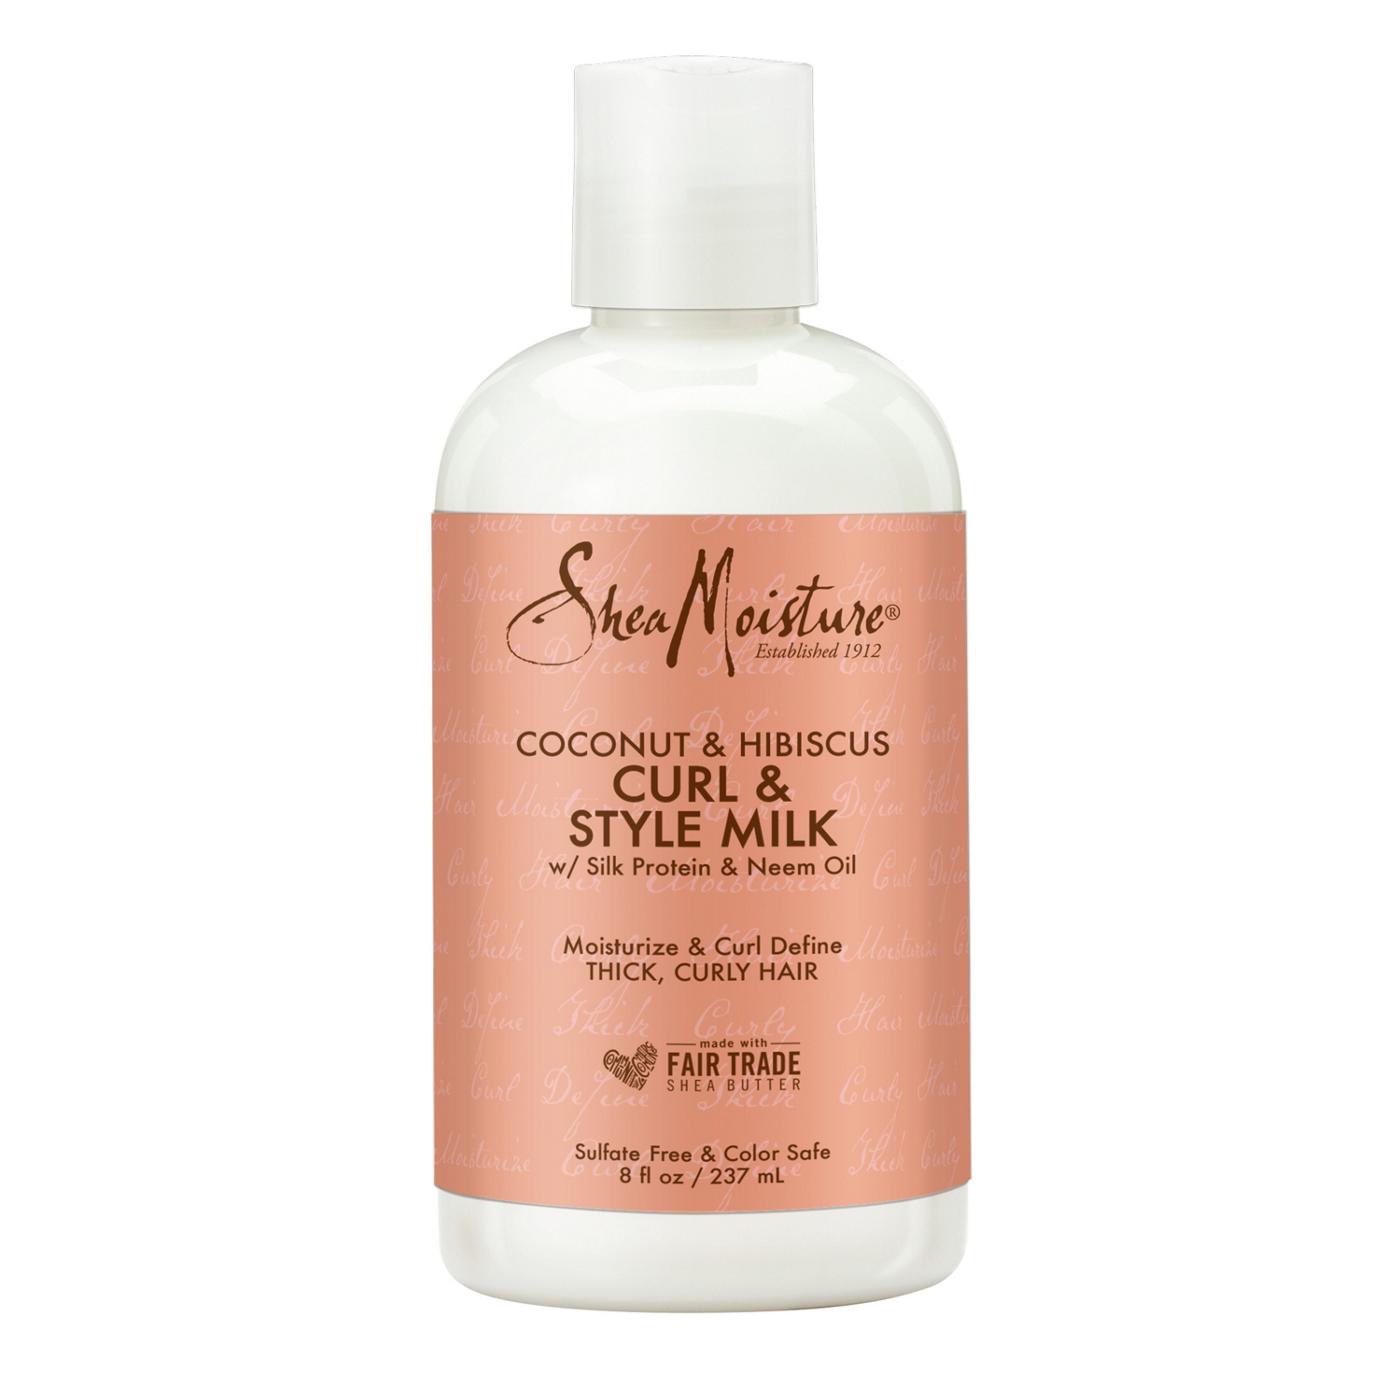 SheaMoisture Coconut & Hibiscus Curl & Style Milk; image 1 of 6